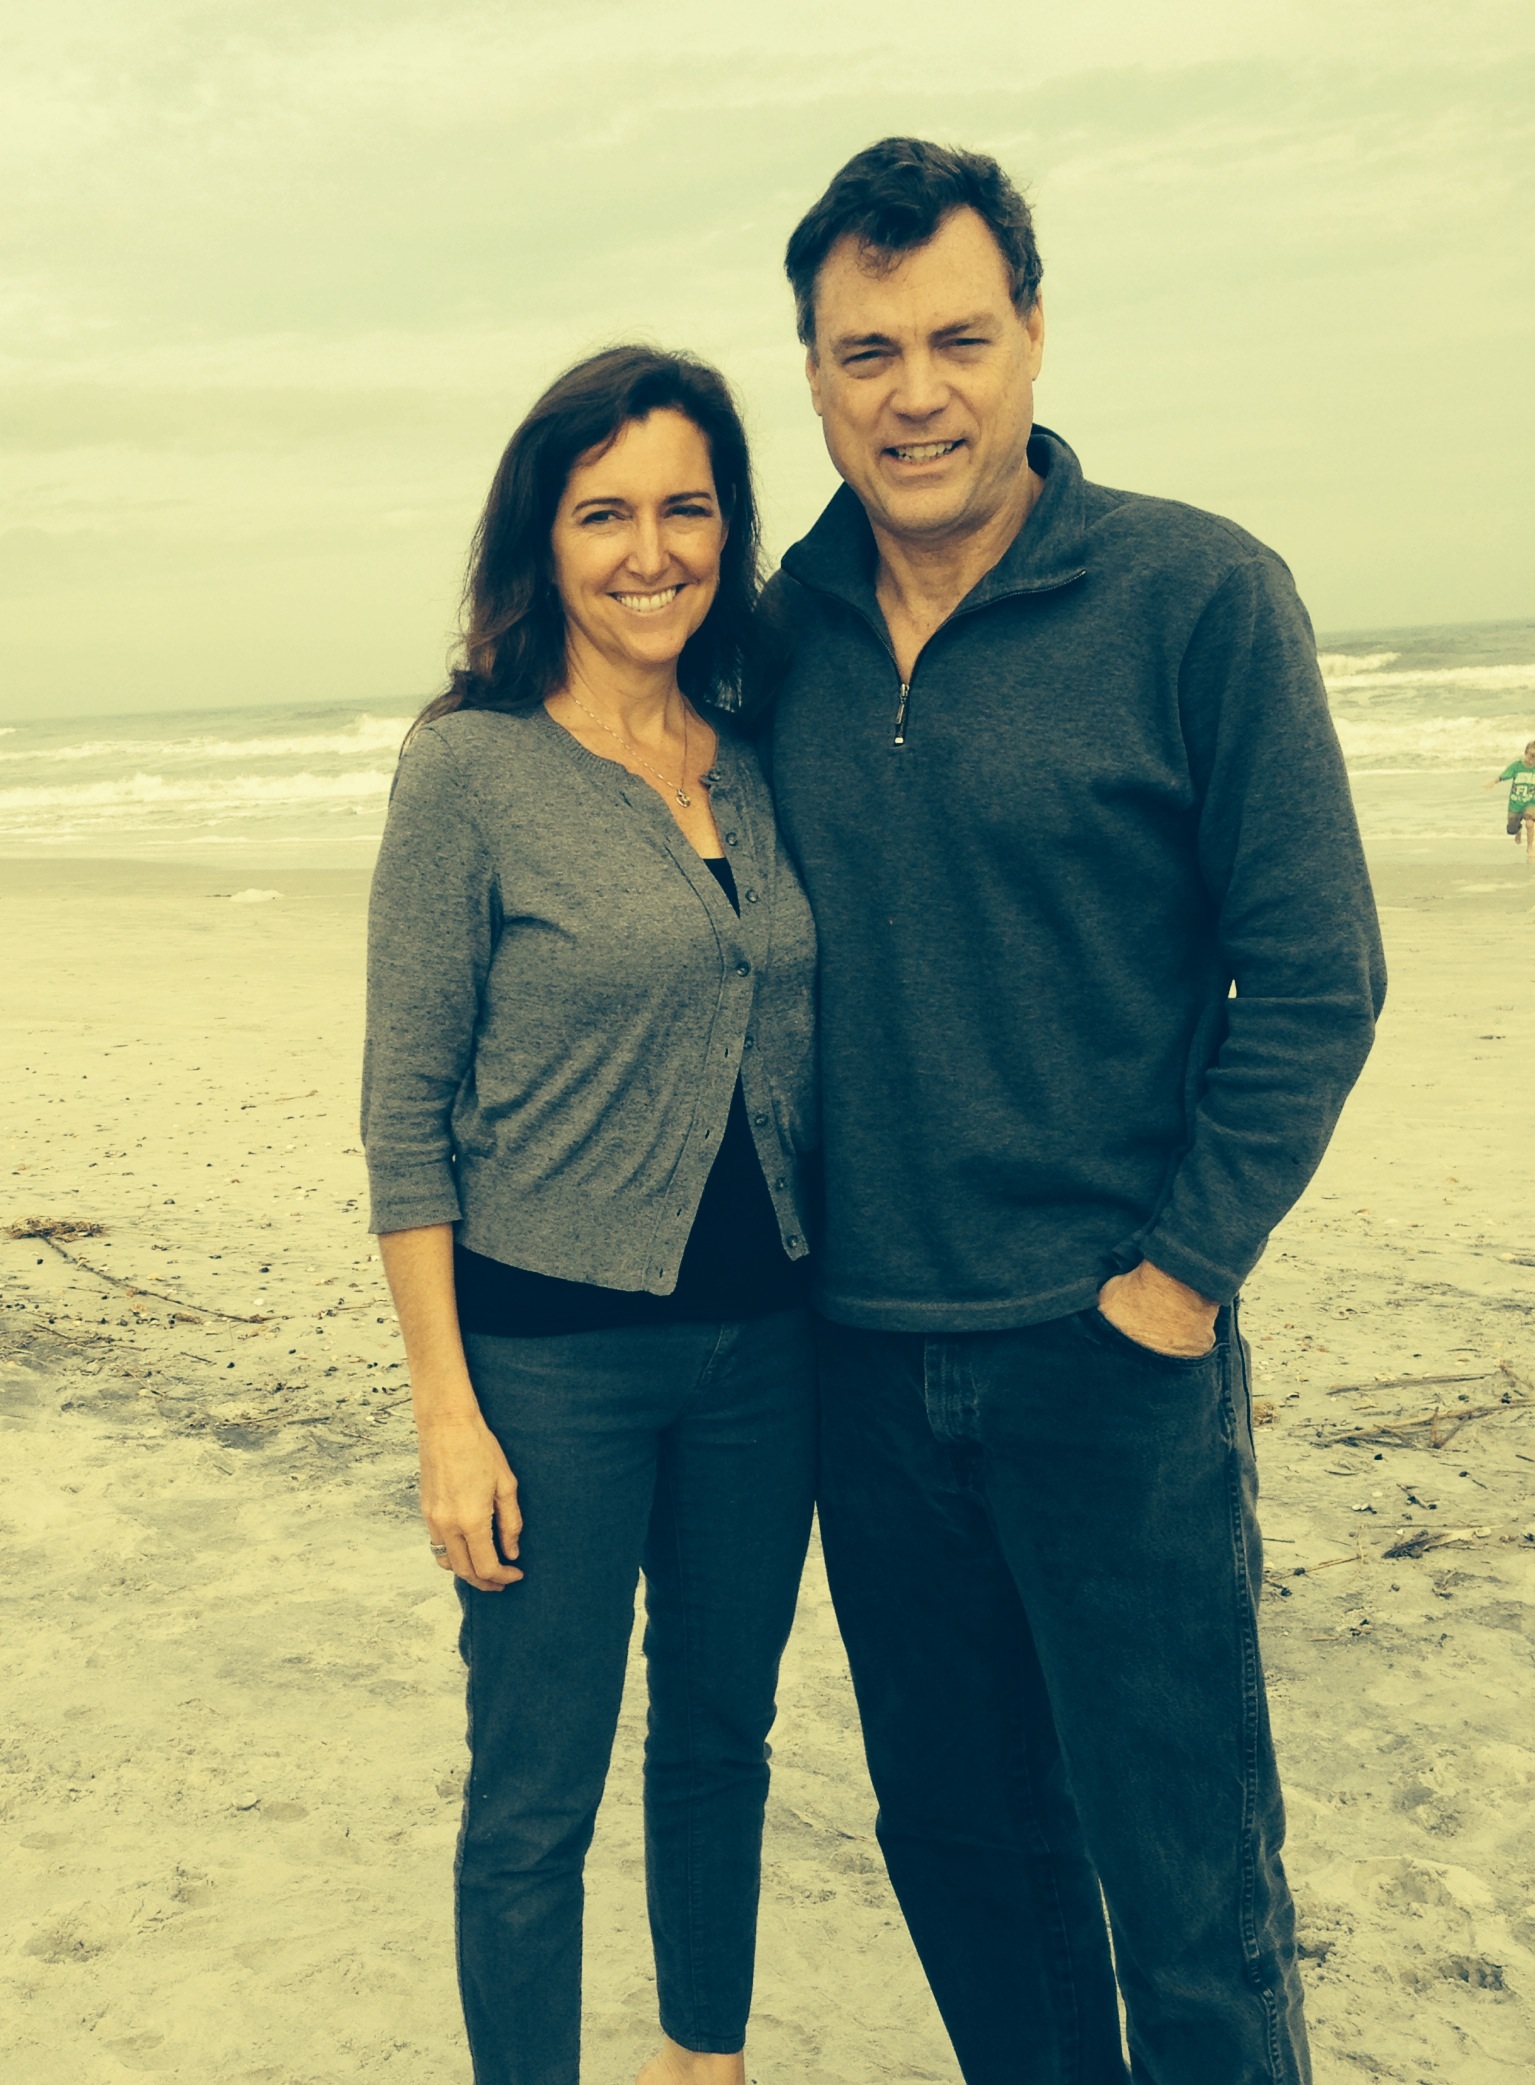 Me and the Mrs @ St. Augustine Beach FL 4Q13